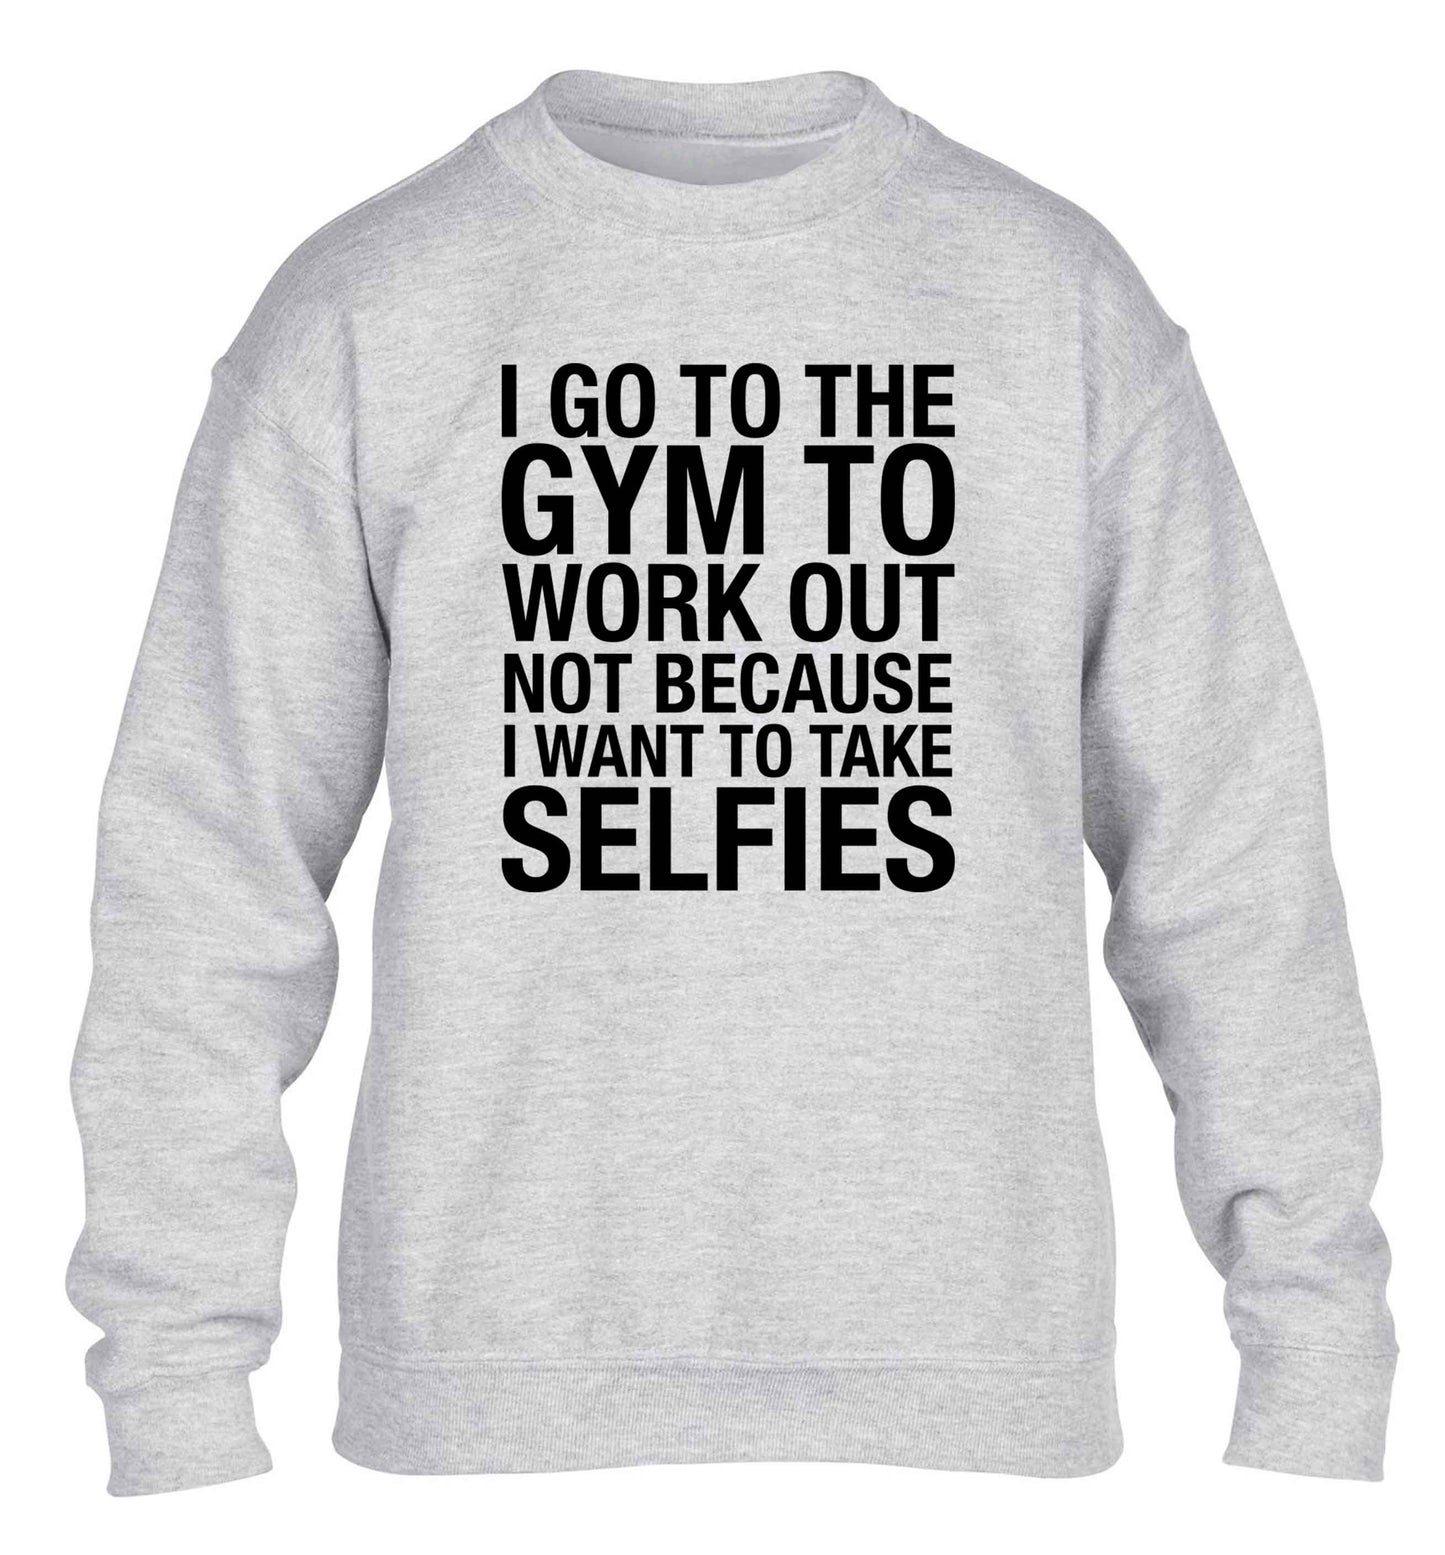 I go to the gym to workout not to take selfies children's grey sweater 12-13 Years